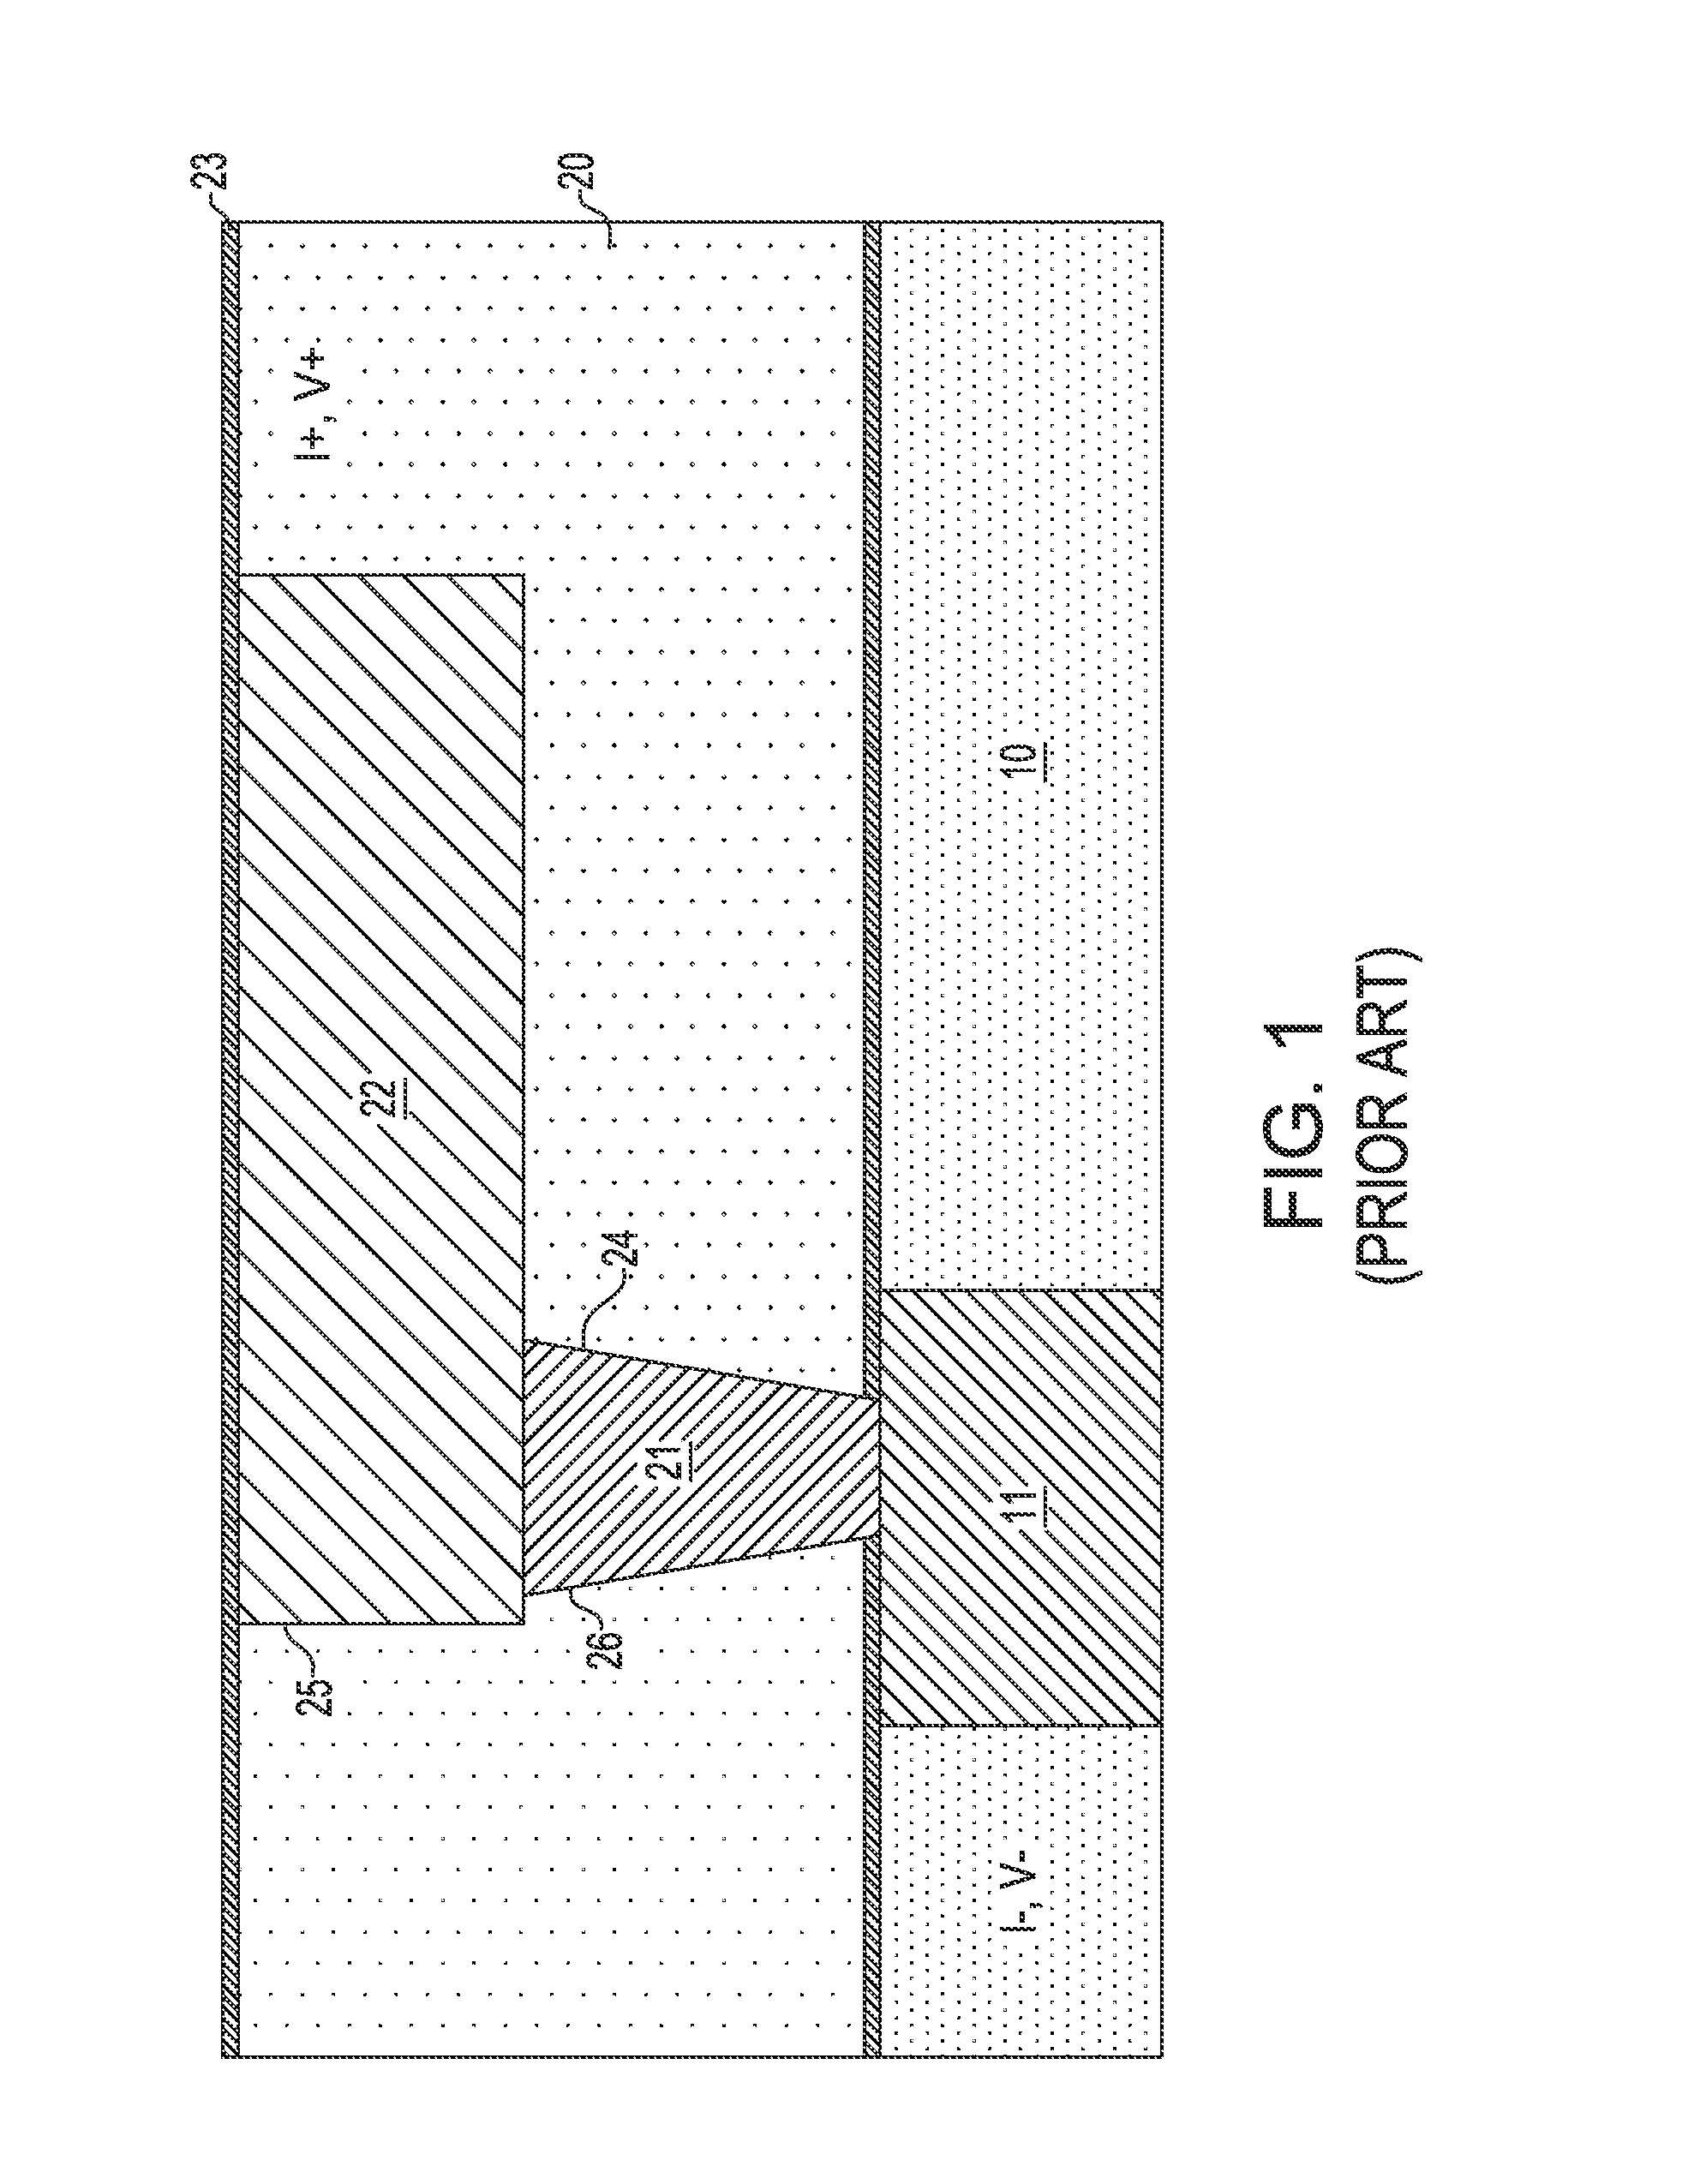 Metal fuse structure for improved programming capability